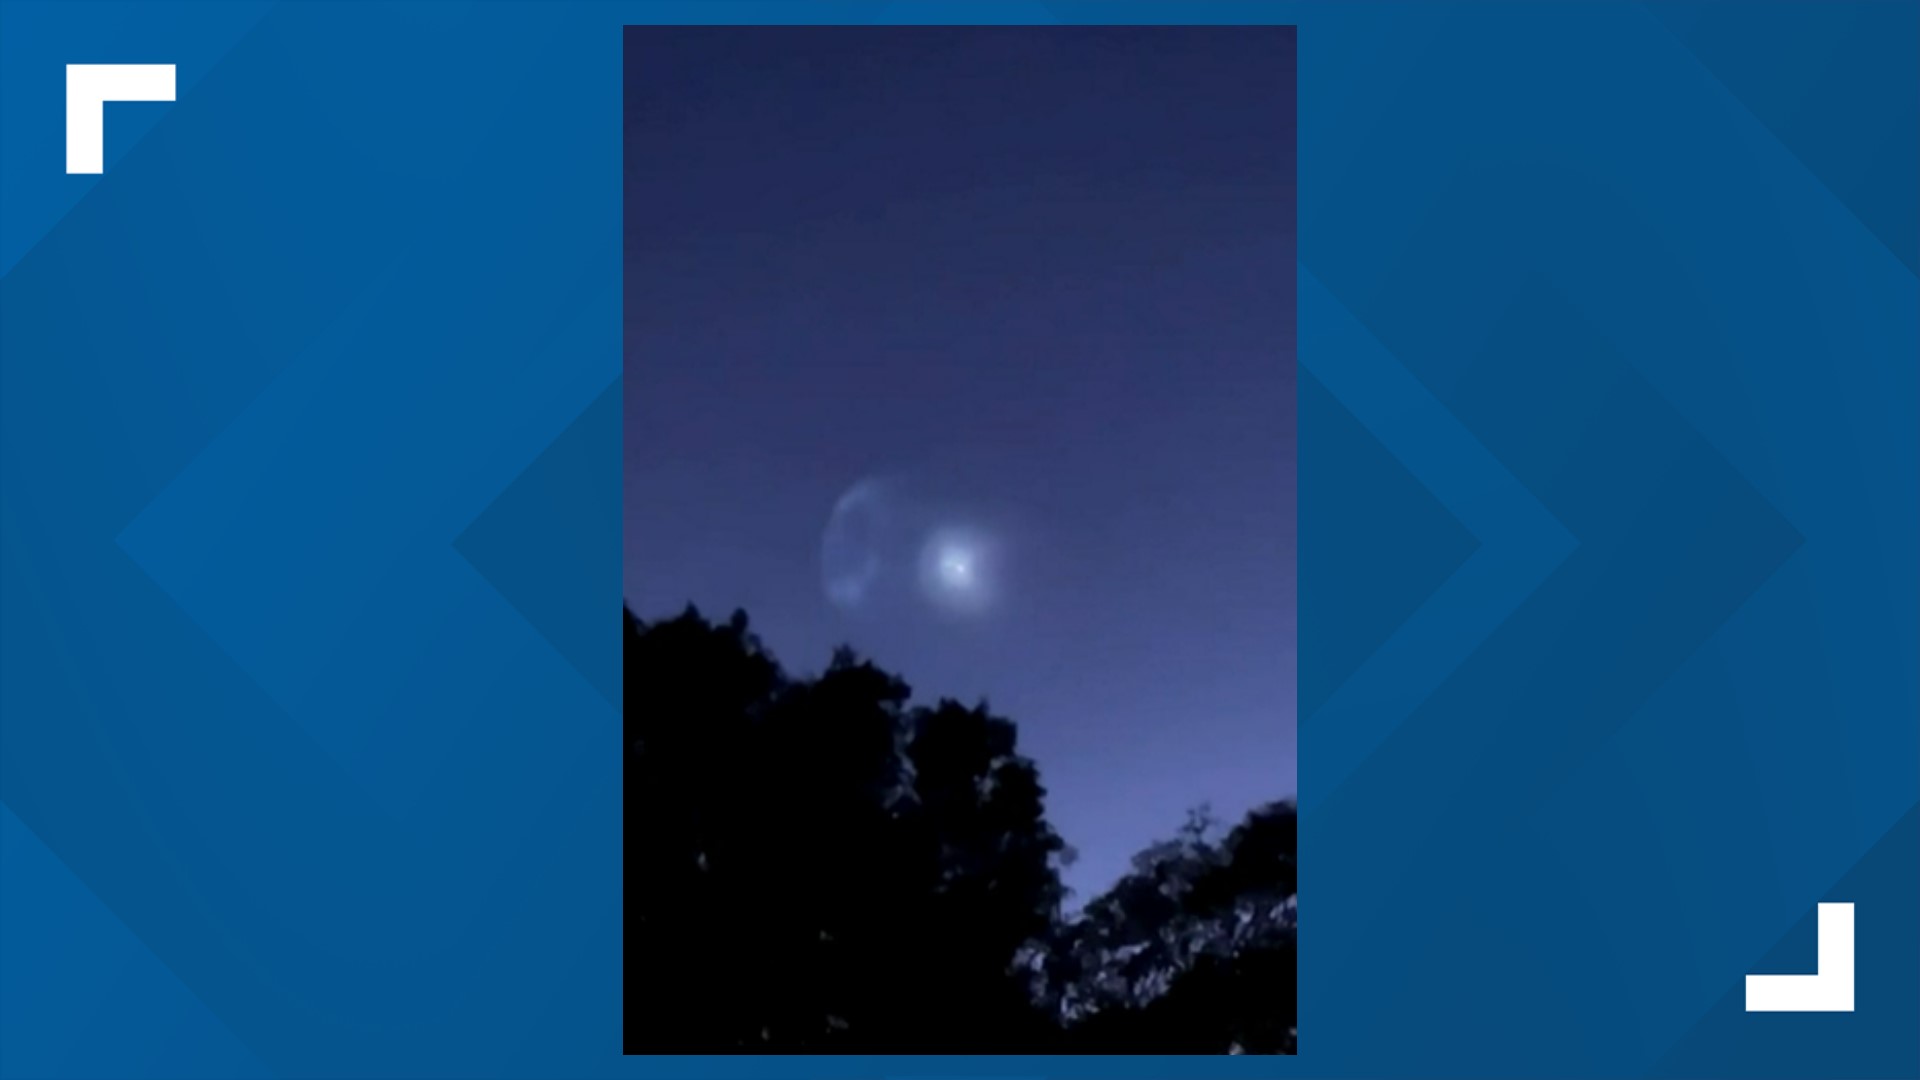 East Texans are claiming to have seen a UFO fly over the region. Here's what it really was.